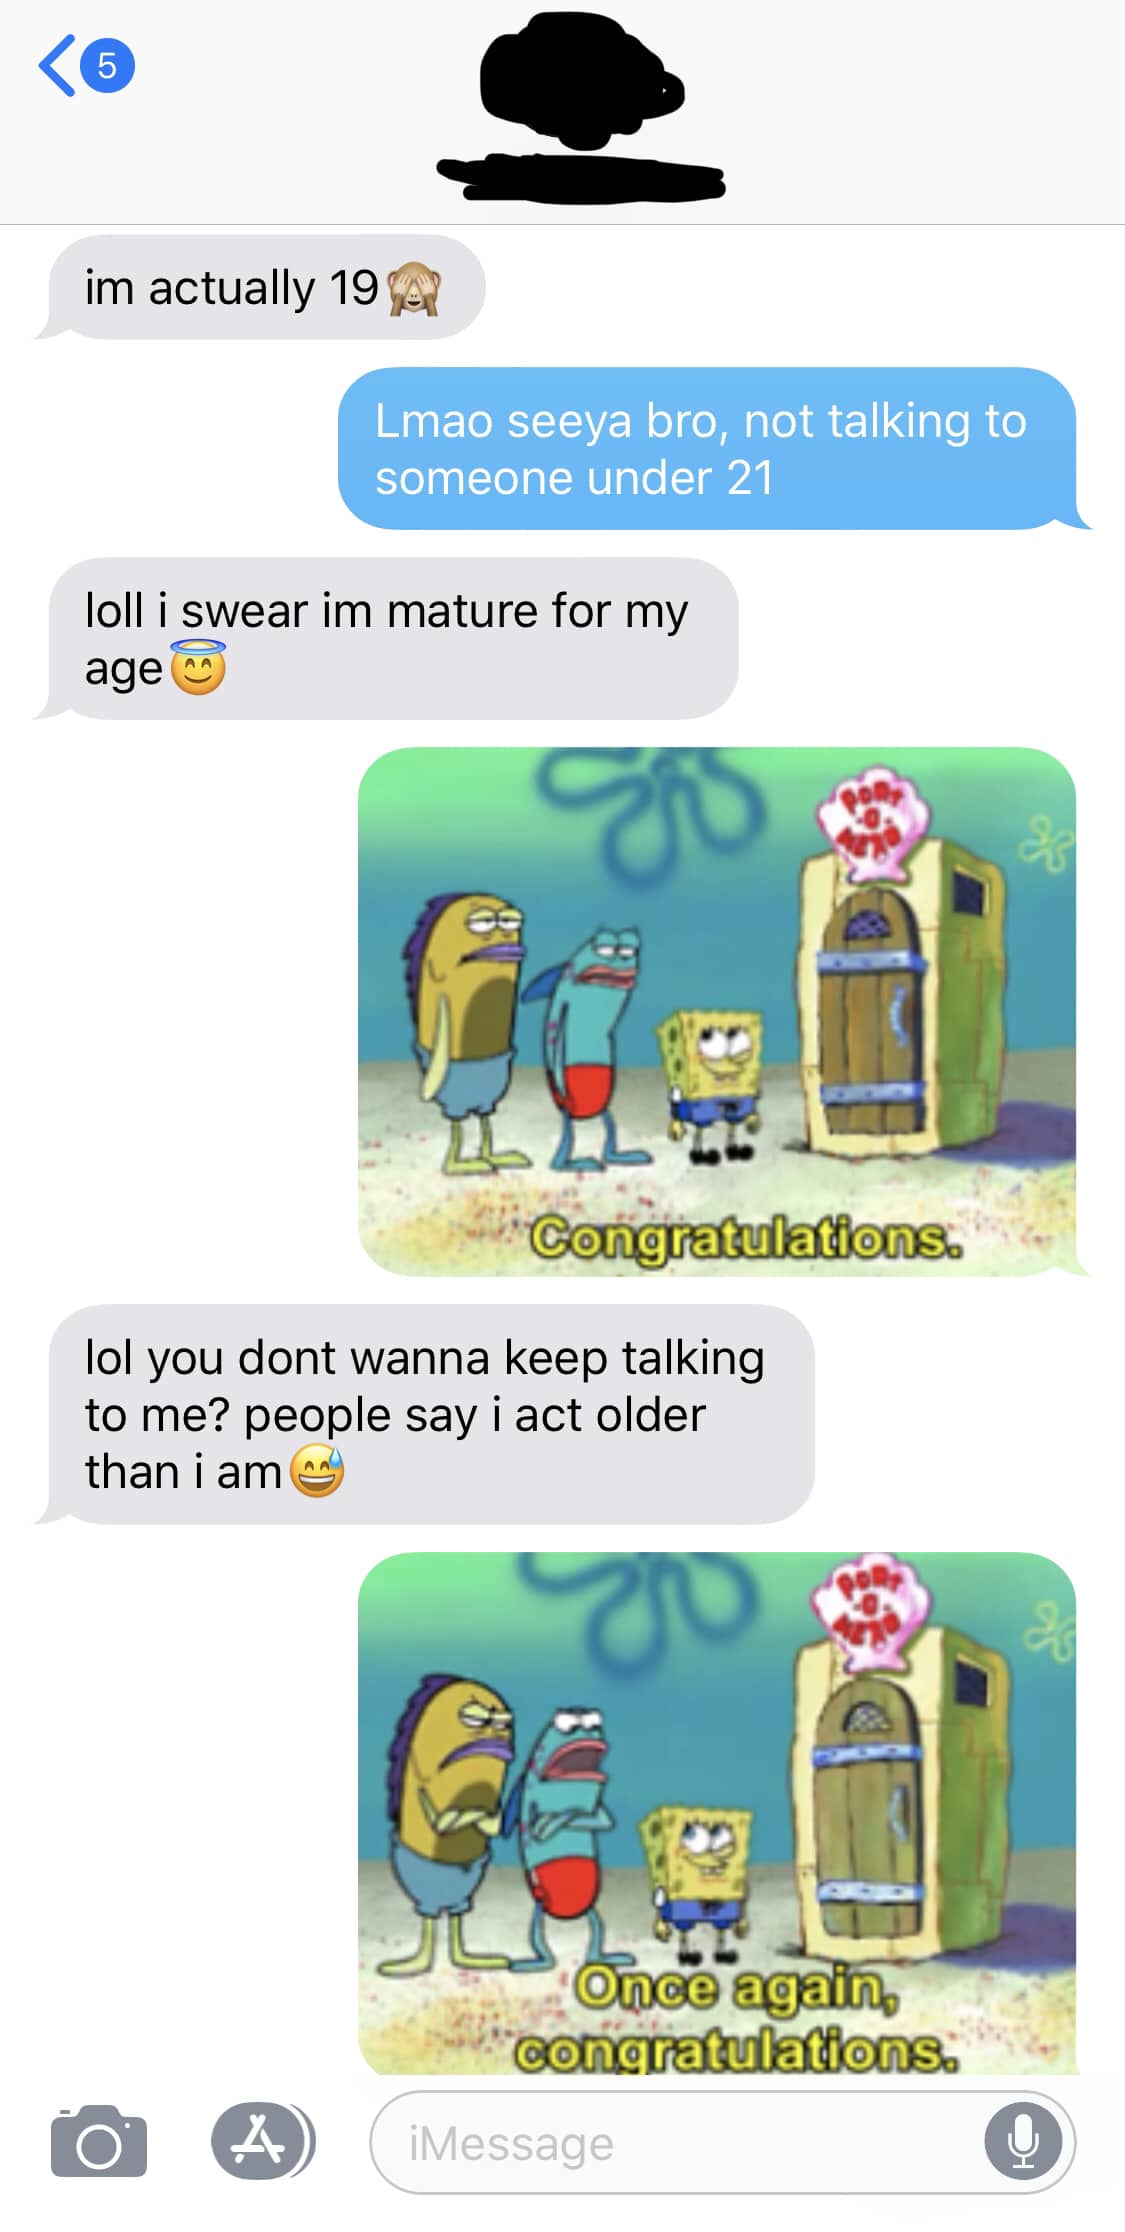 spongebob spongebob-memes spongebob text: im actually 19 Lmao seeya bro, not talking to someone under 21 loll i swear im mature for my age Congratulations lol you dont wanna keep talking to me? people say i act older than i am O) once again con . ratulatl€ns iMessage 